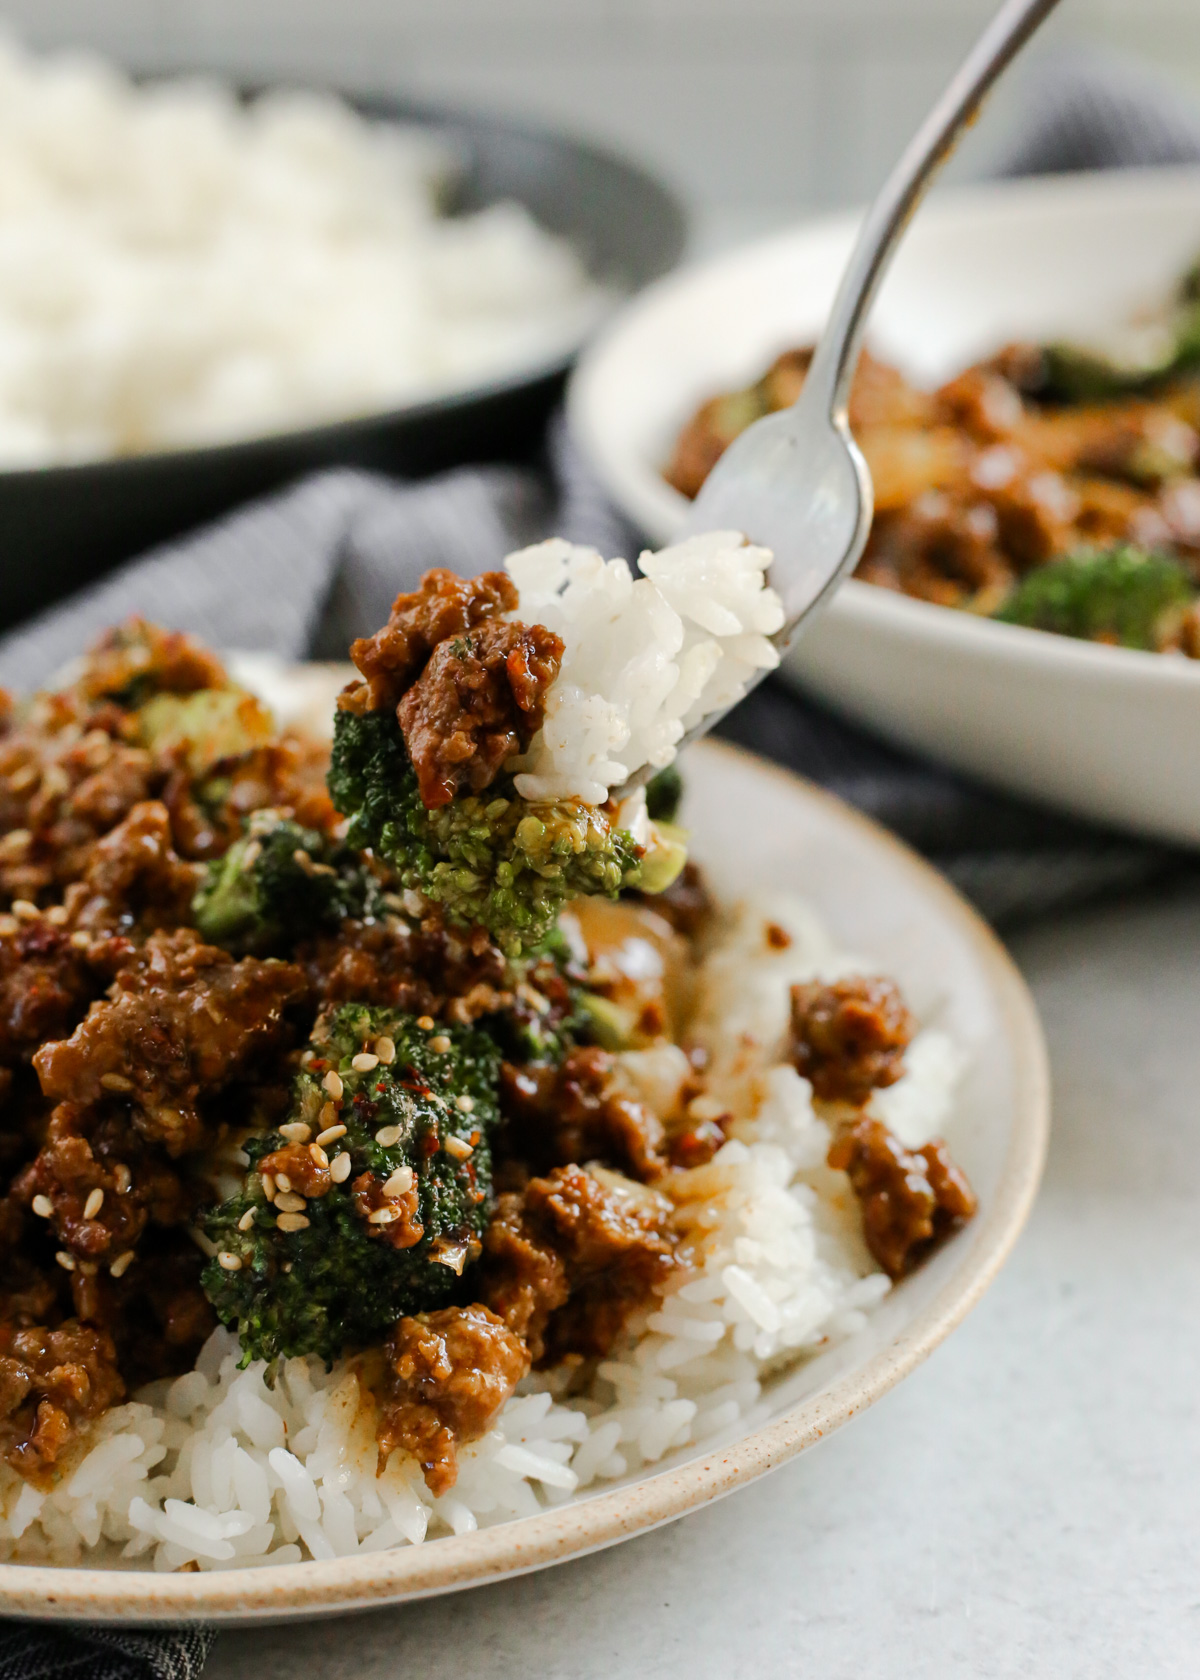 A silver forks descends into a plate of steamed white rice covered with ground beef and broccoli